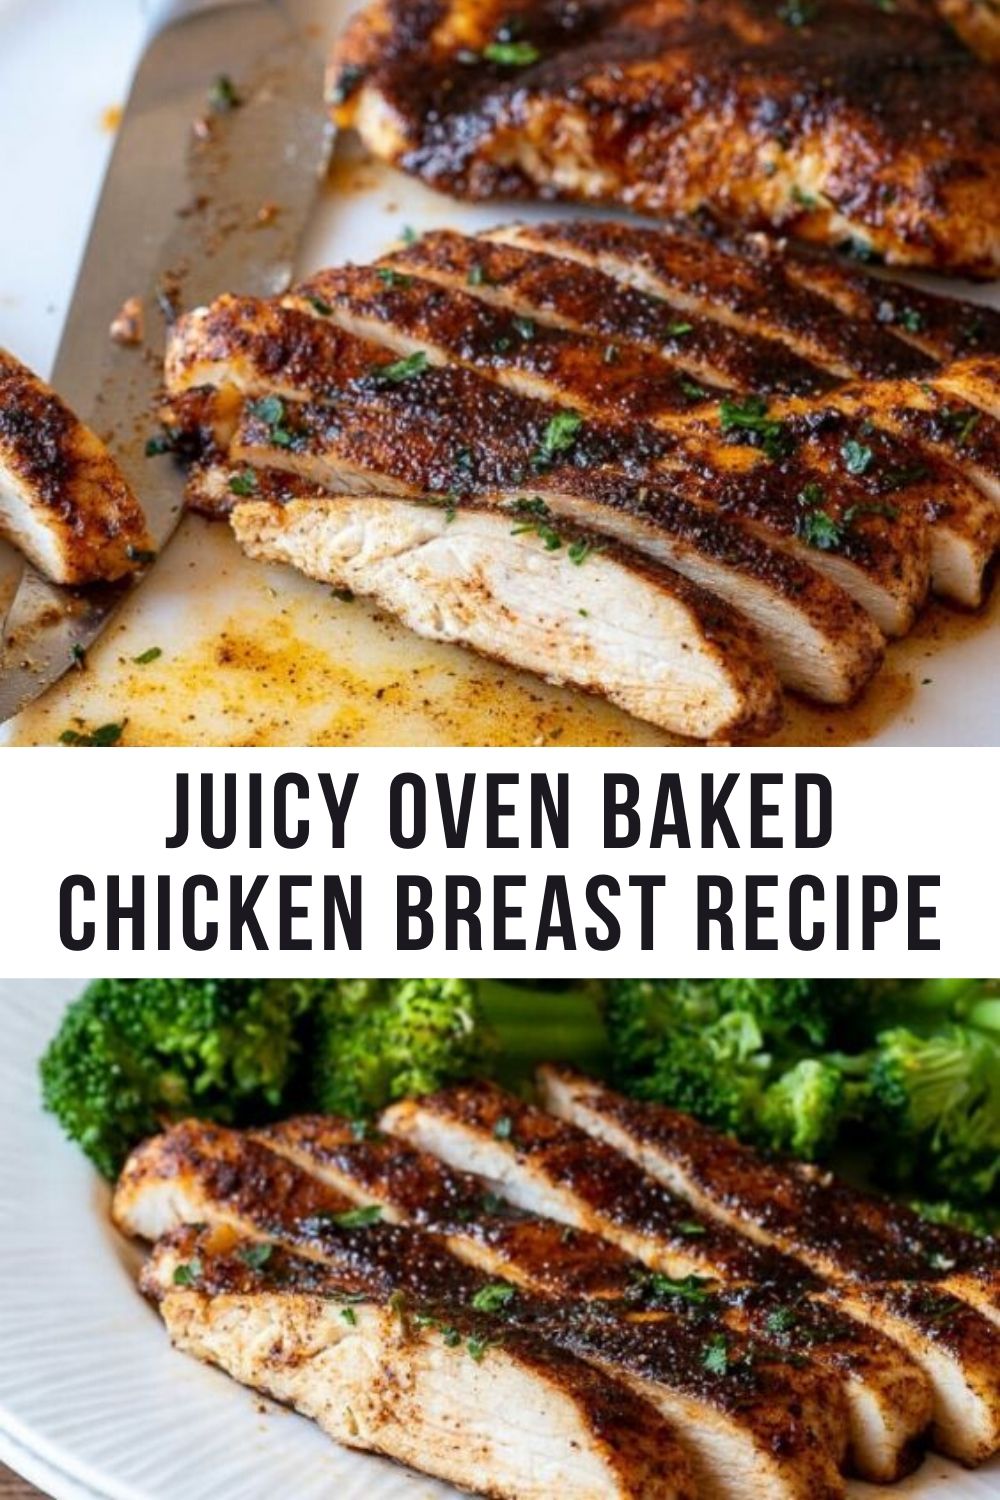 Juicy Oven Baked Chicken Breast Recipe - Pinnerfood